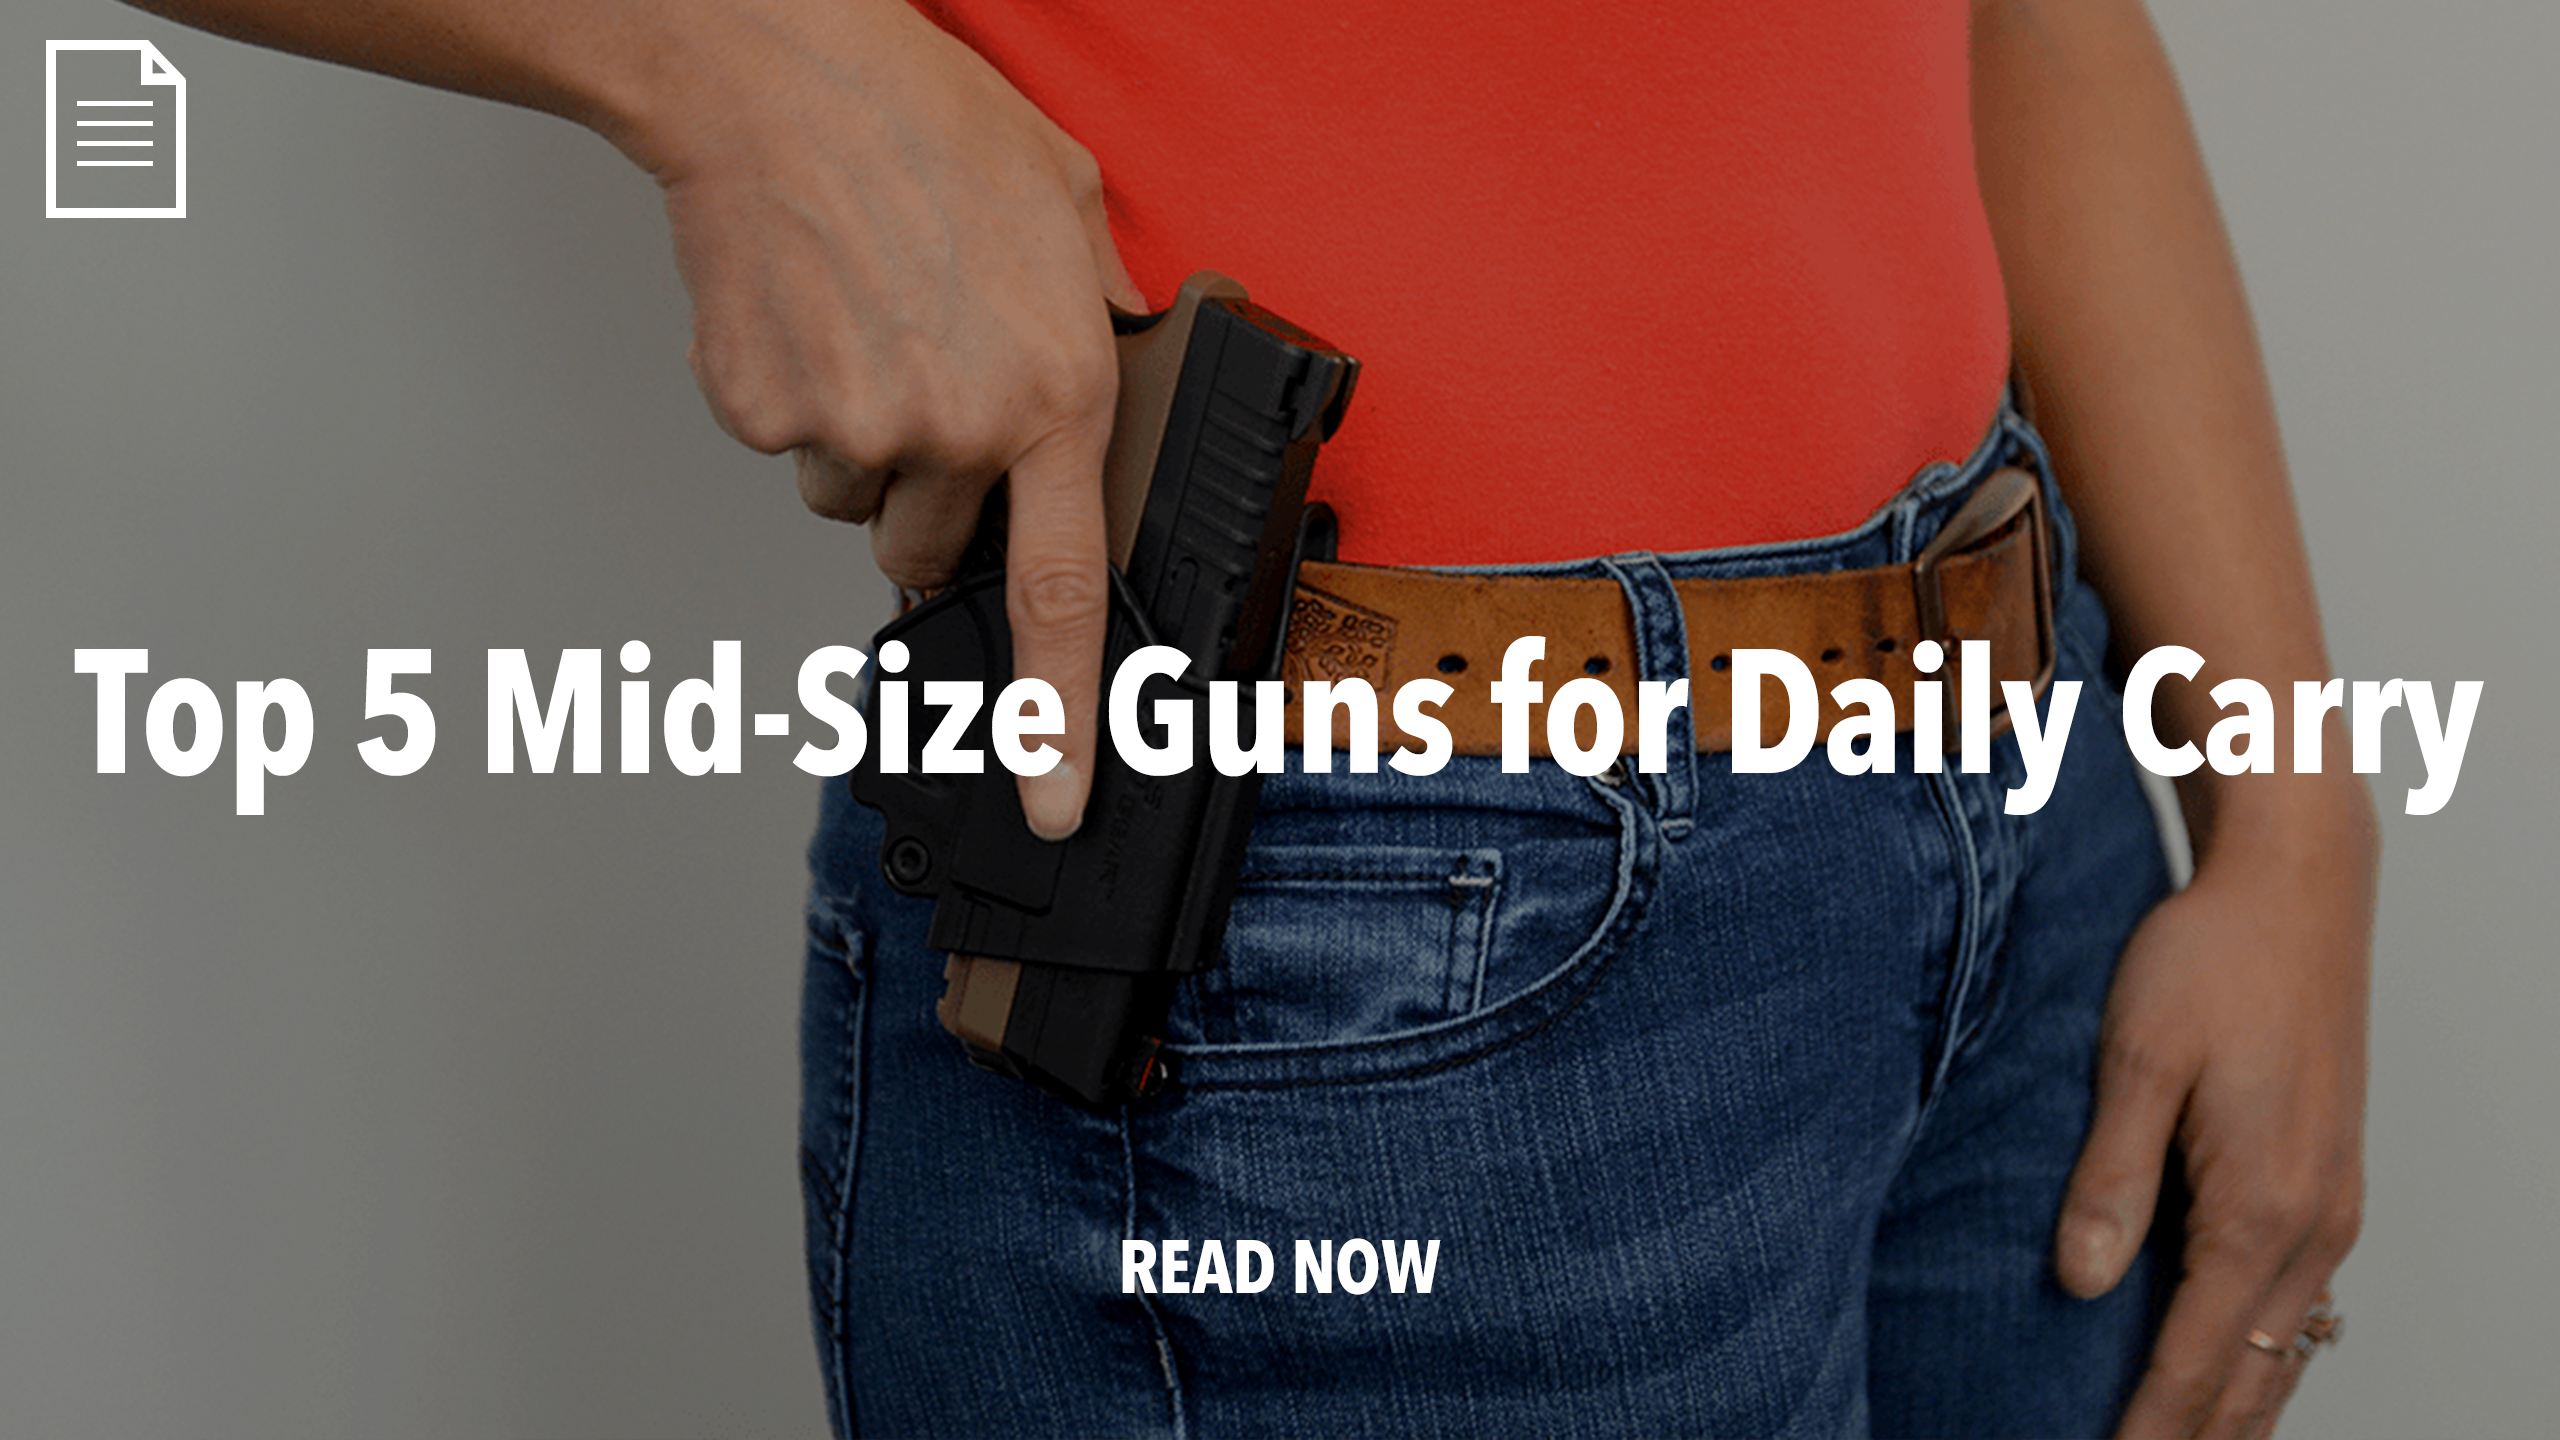 Top 5 Mid-Size Guns for Daily Carry